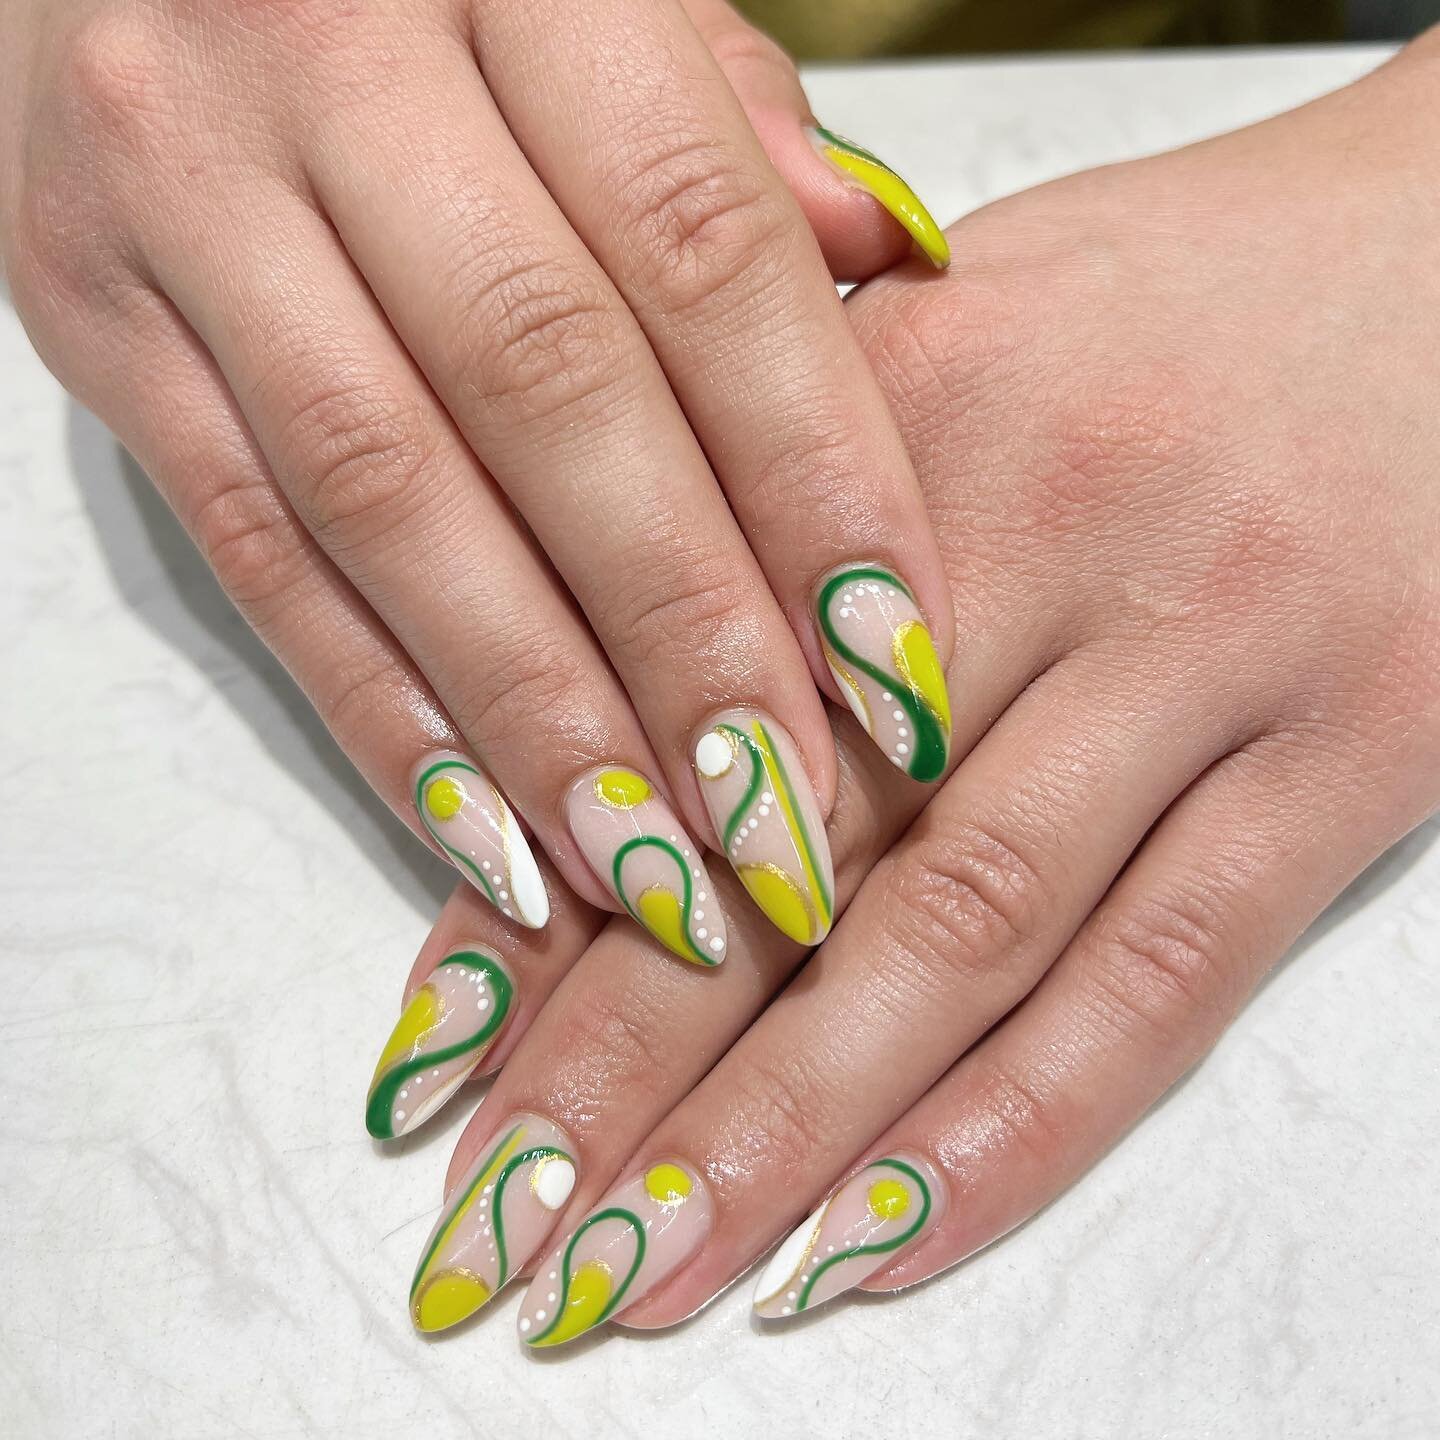 LEVEL OF COMPLEXITY: MEDIUM 10 NAILS. 🍀🍾🍻 St. Patrick&rsquo;s day is coming up! Be sure to book your appointments in advance. For last minute basic services without art, please call us 😊 #boston #stpatricksdaynails #bns #nailsofboston #bostonnail